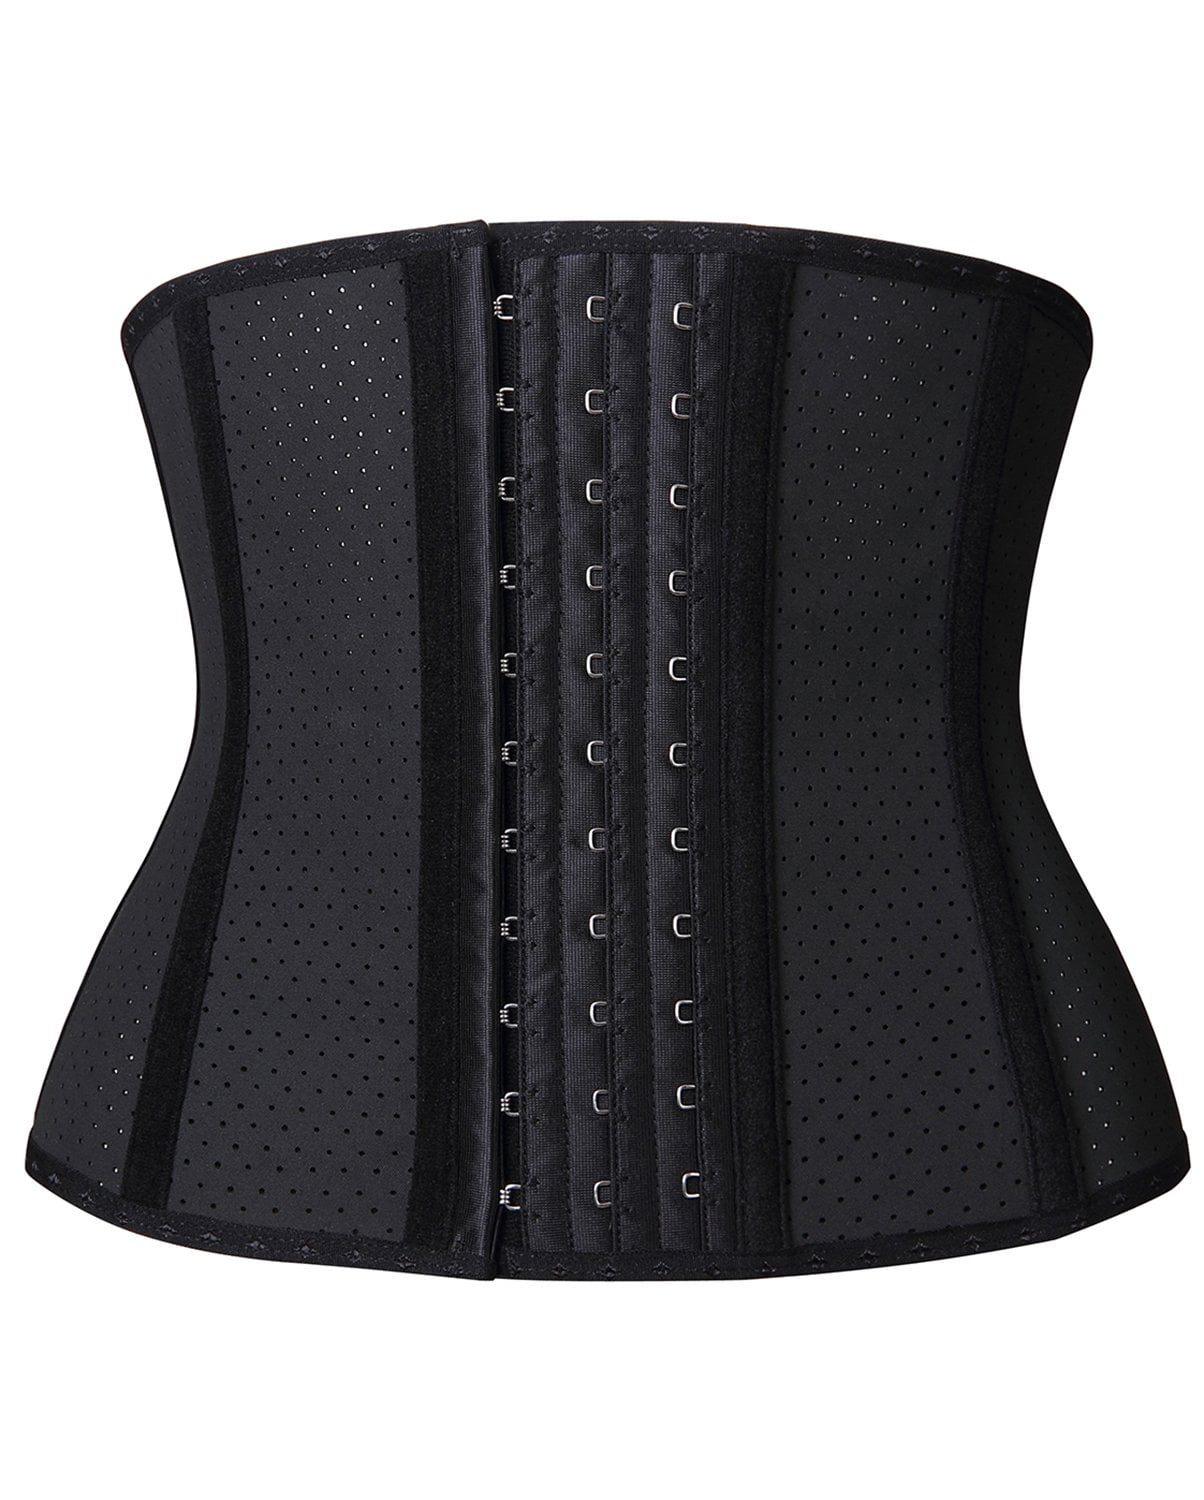 YIANNA Women's Underbust Breathable Short Torso Latex Waist Trainer Corset  for Tummy Control Sports Workout Hourglass Body Shaper Black-S